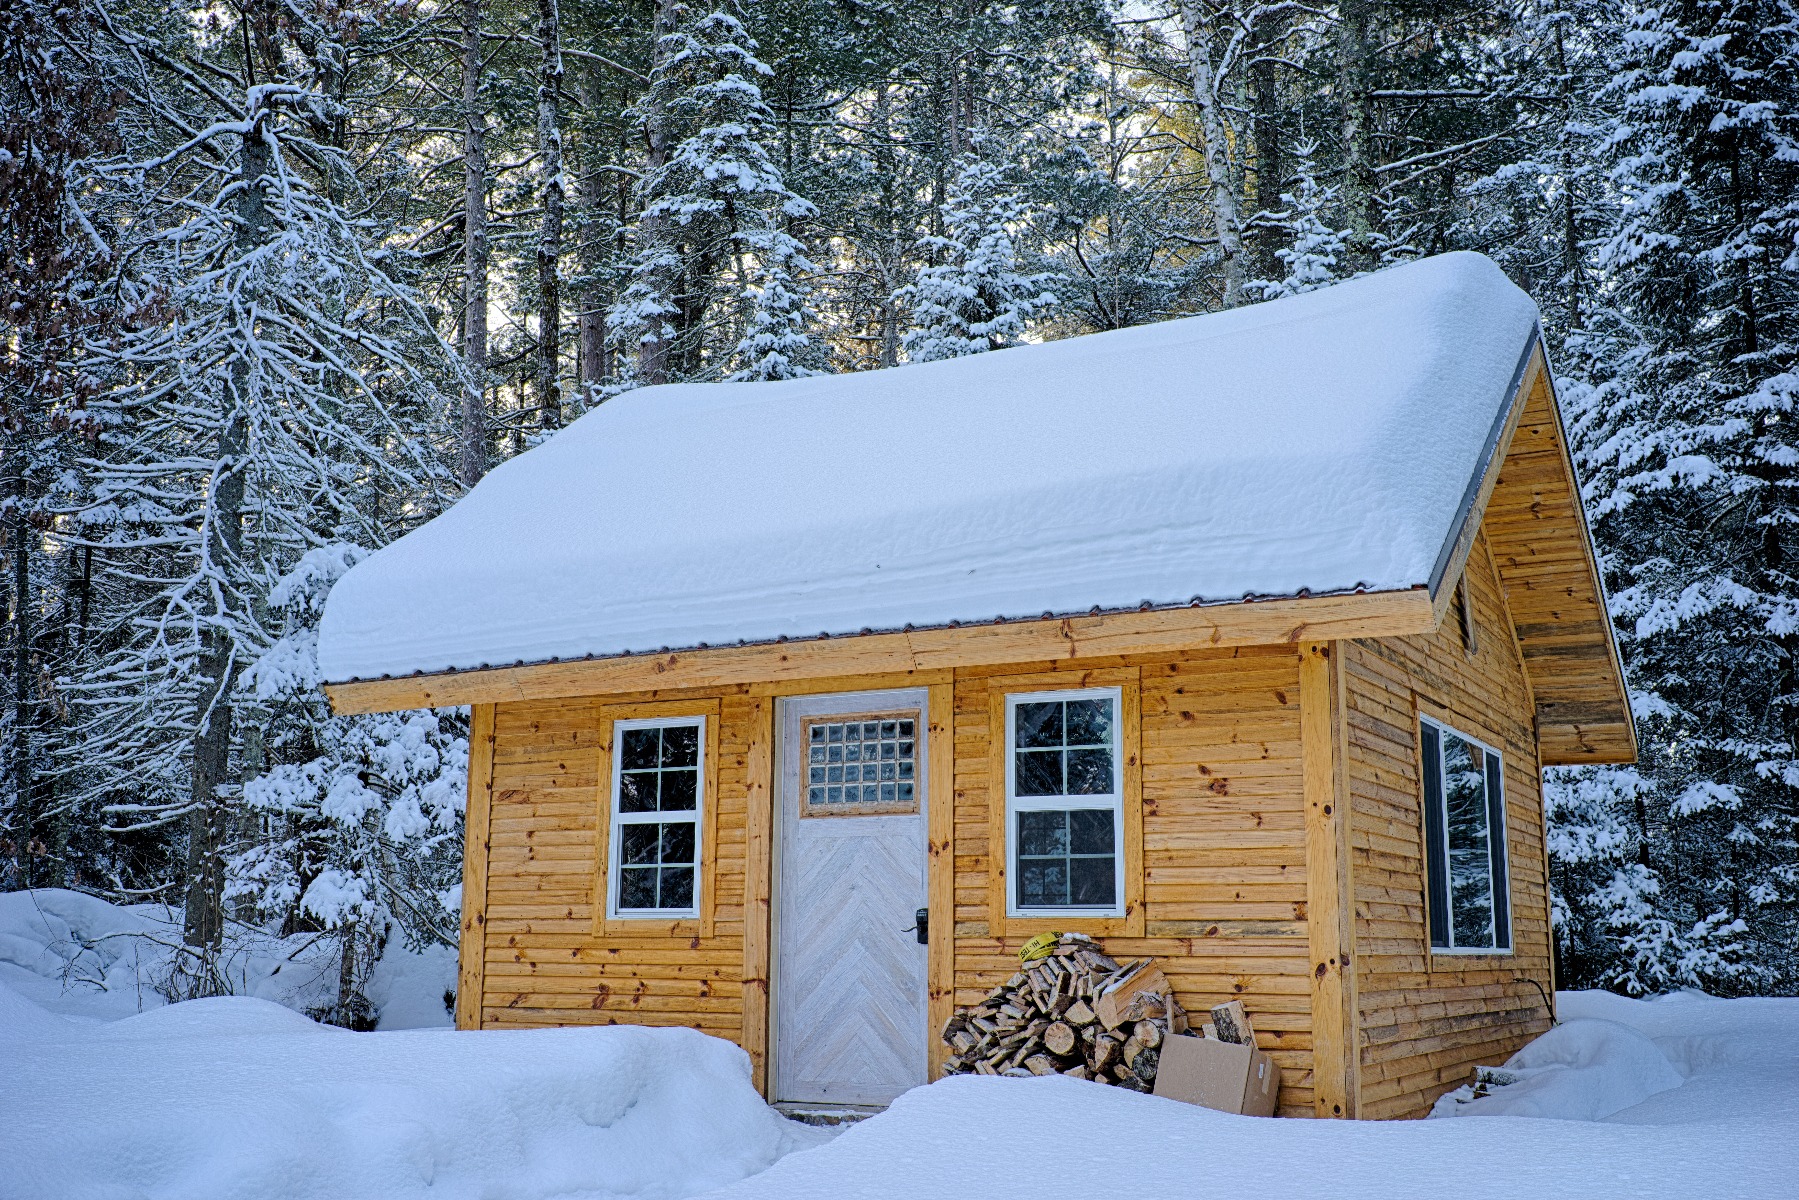 Insulation is a cost-effective way of keeping your cabin warm during the winter